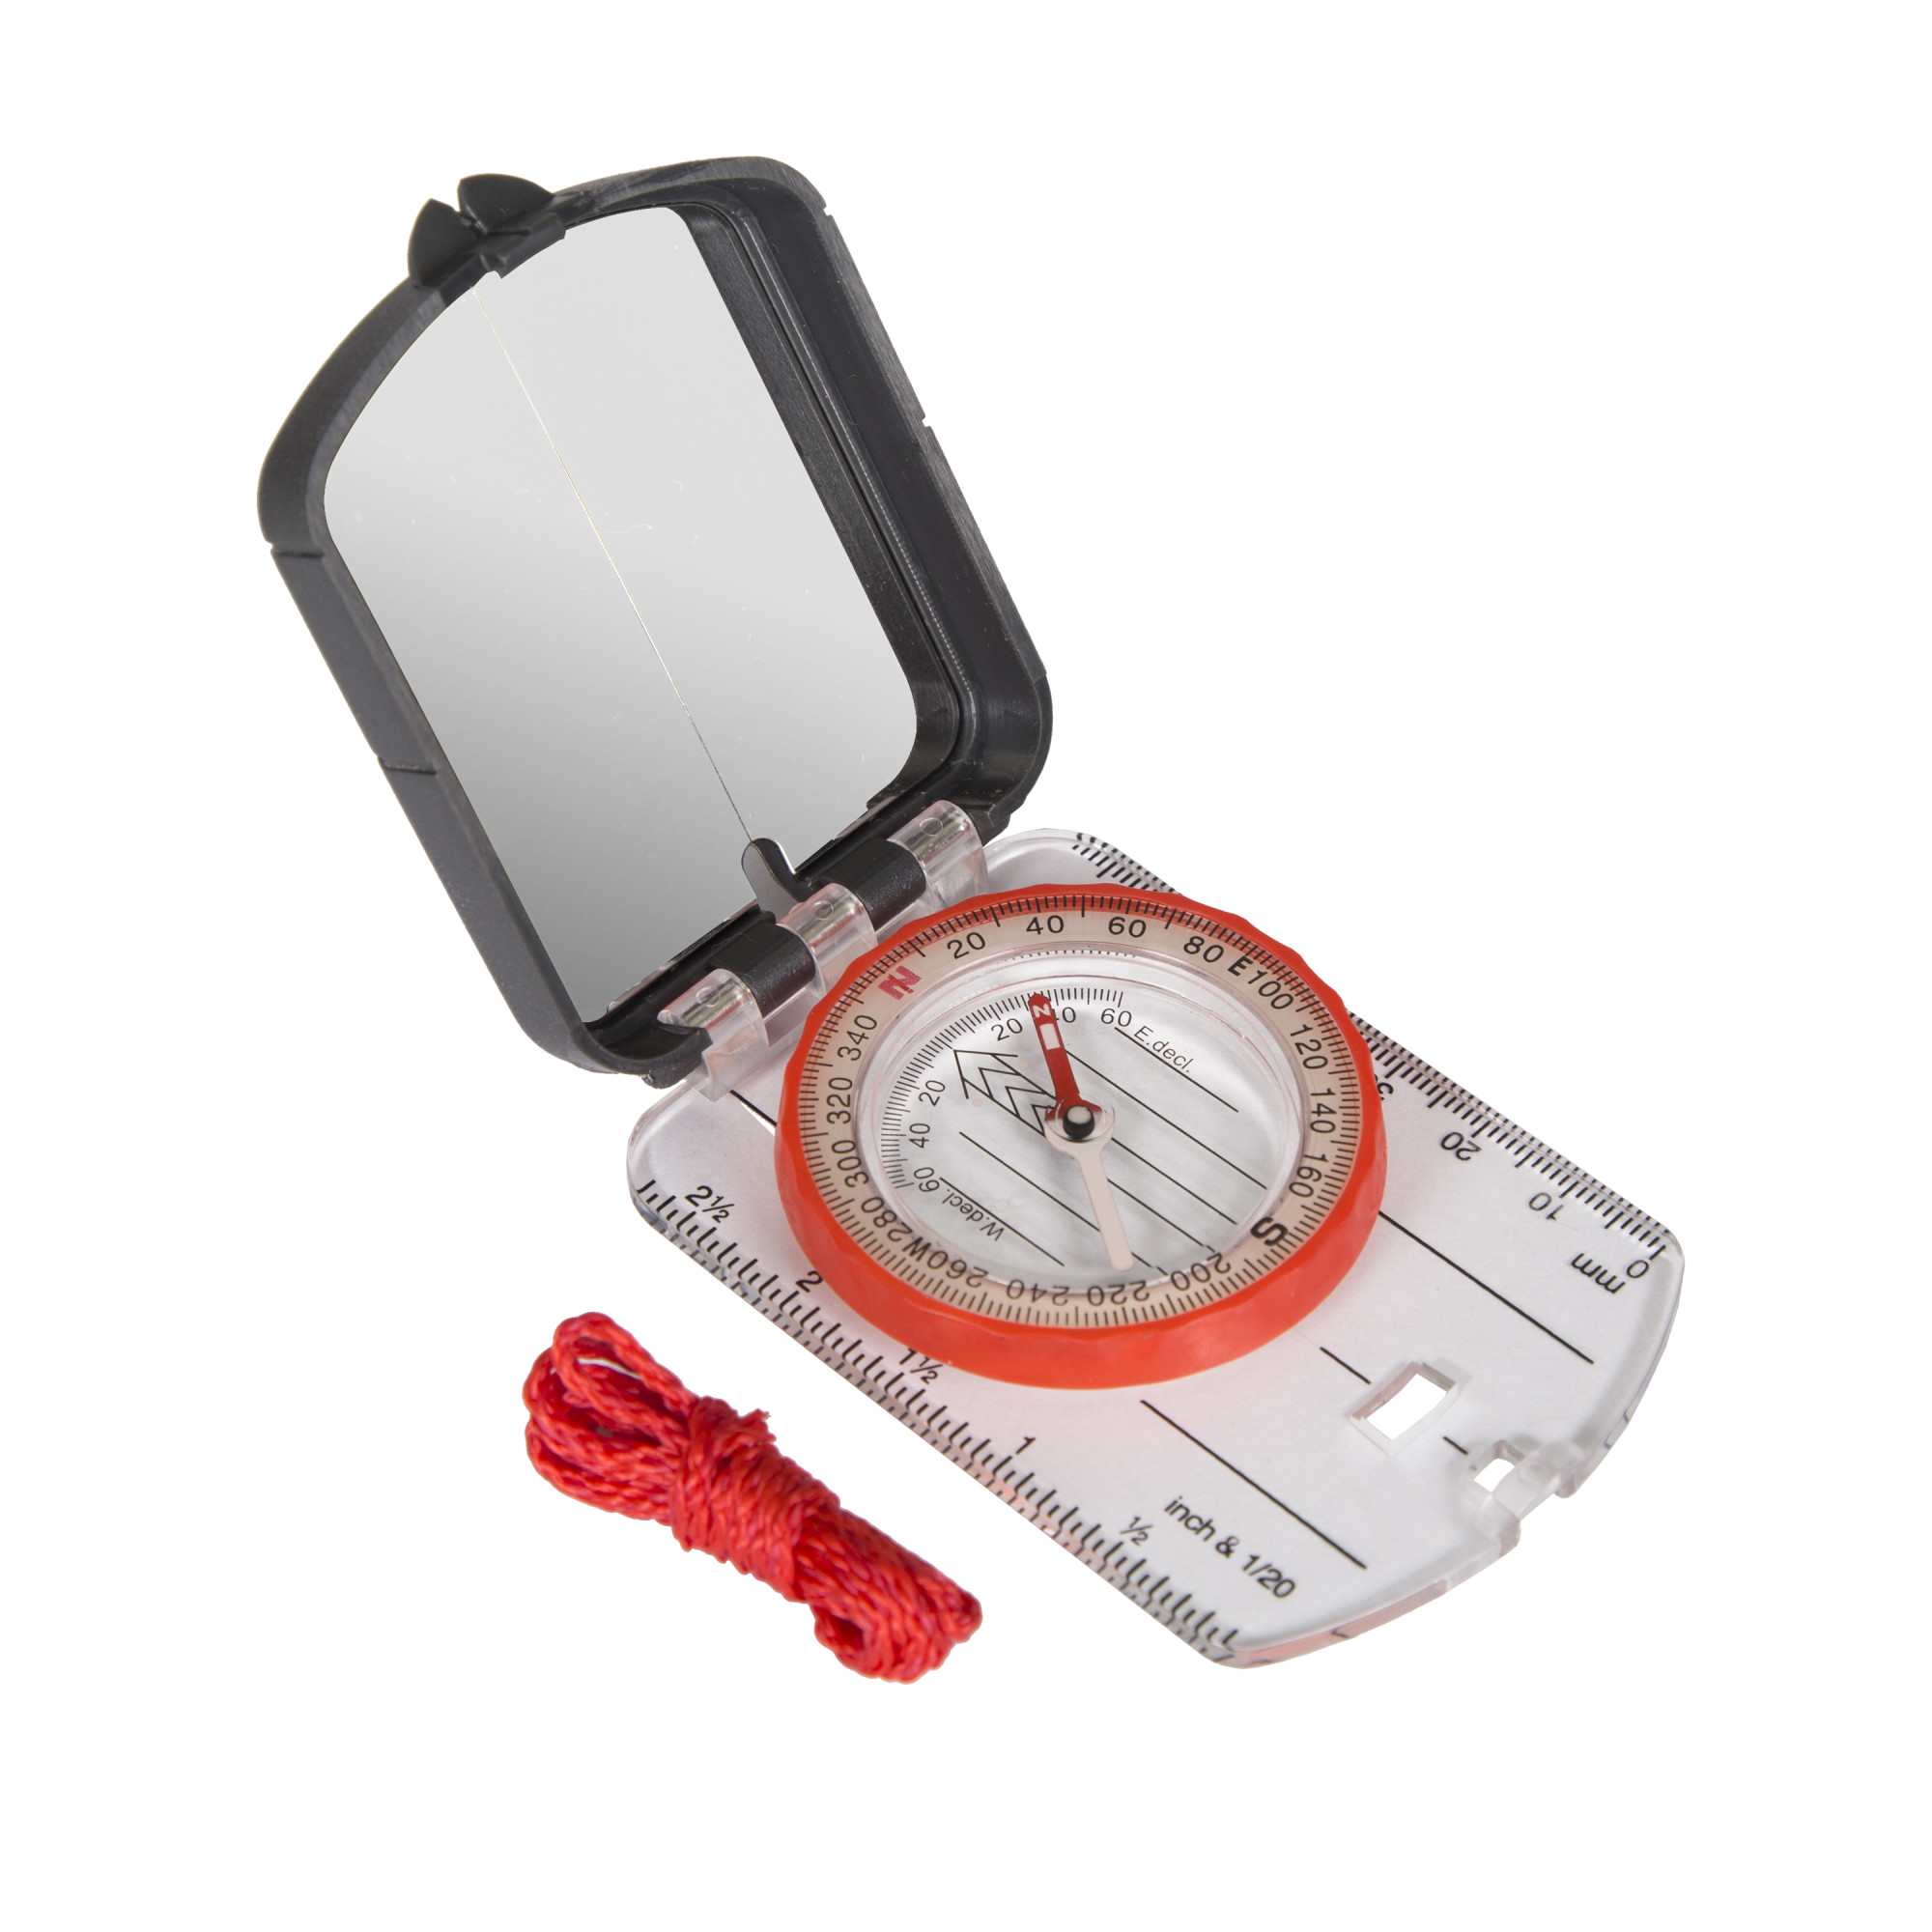 Stansport Compass Multi-Function with Mirrored Cove